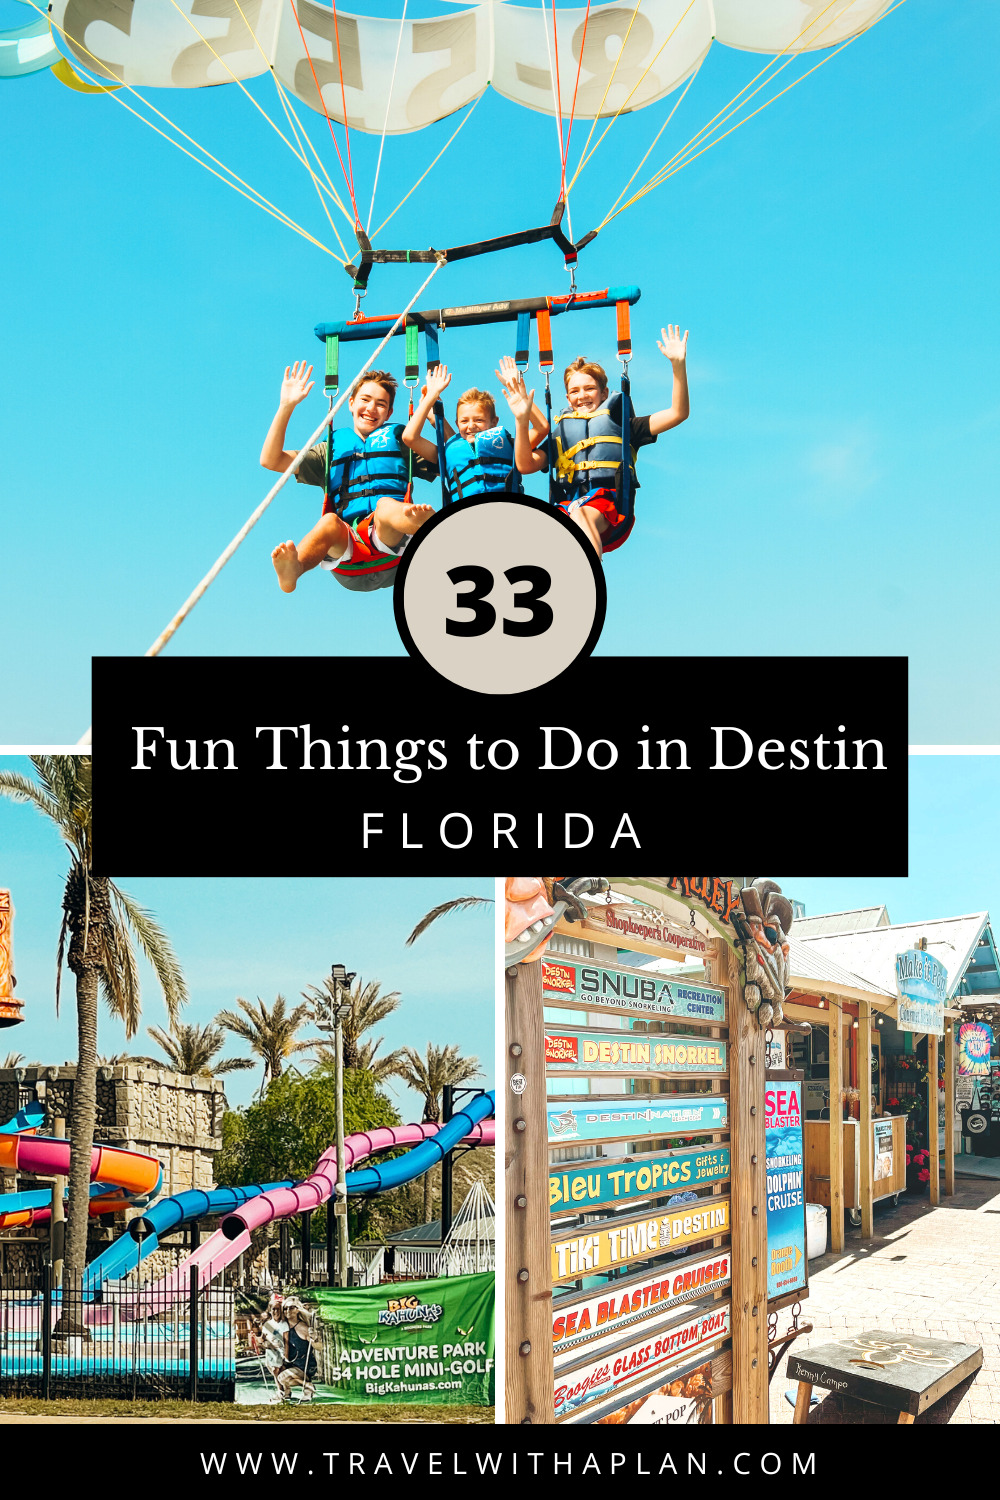 Check out our list of fun things to do in Destin with kids while on vacation!  This Florida vacation is packed with fun things to do both outdoors, and indoors when it's raining or cold.  Start planning your Destin family vacation here!  #familytravel #Florida #Destin